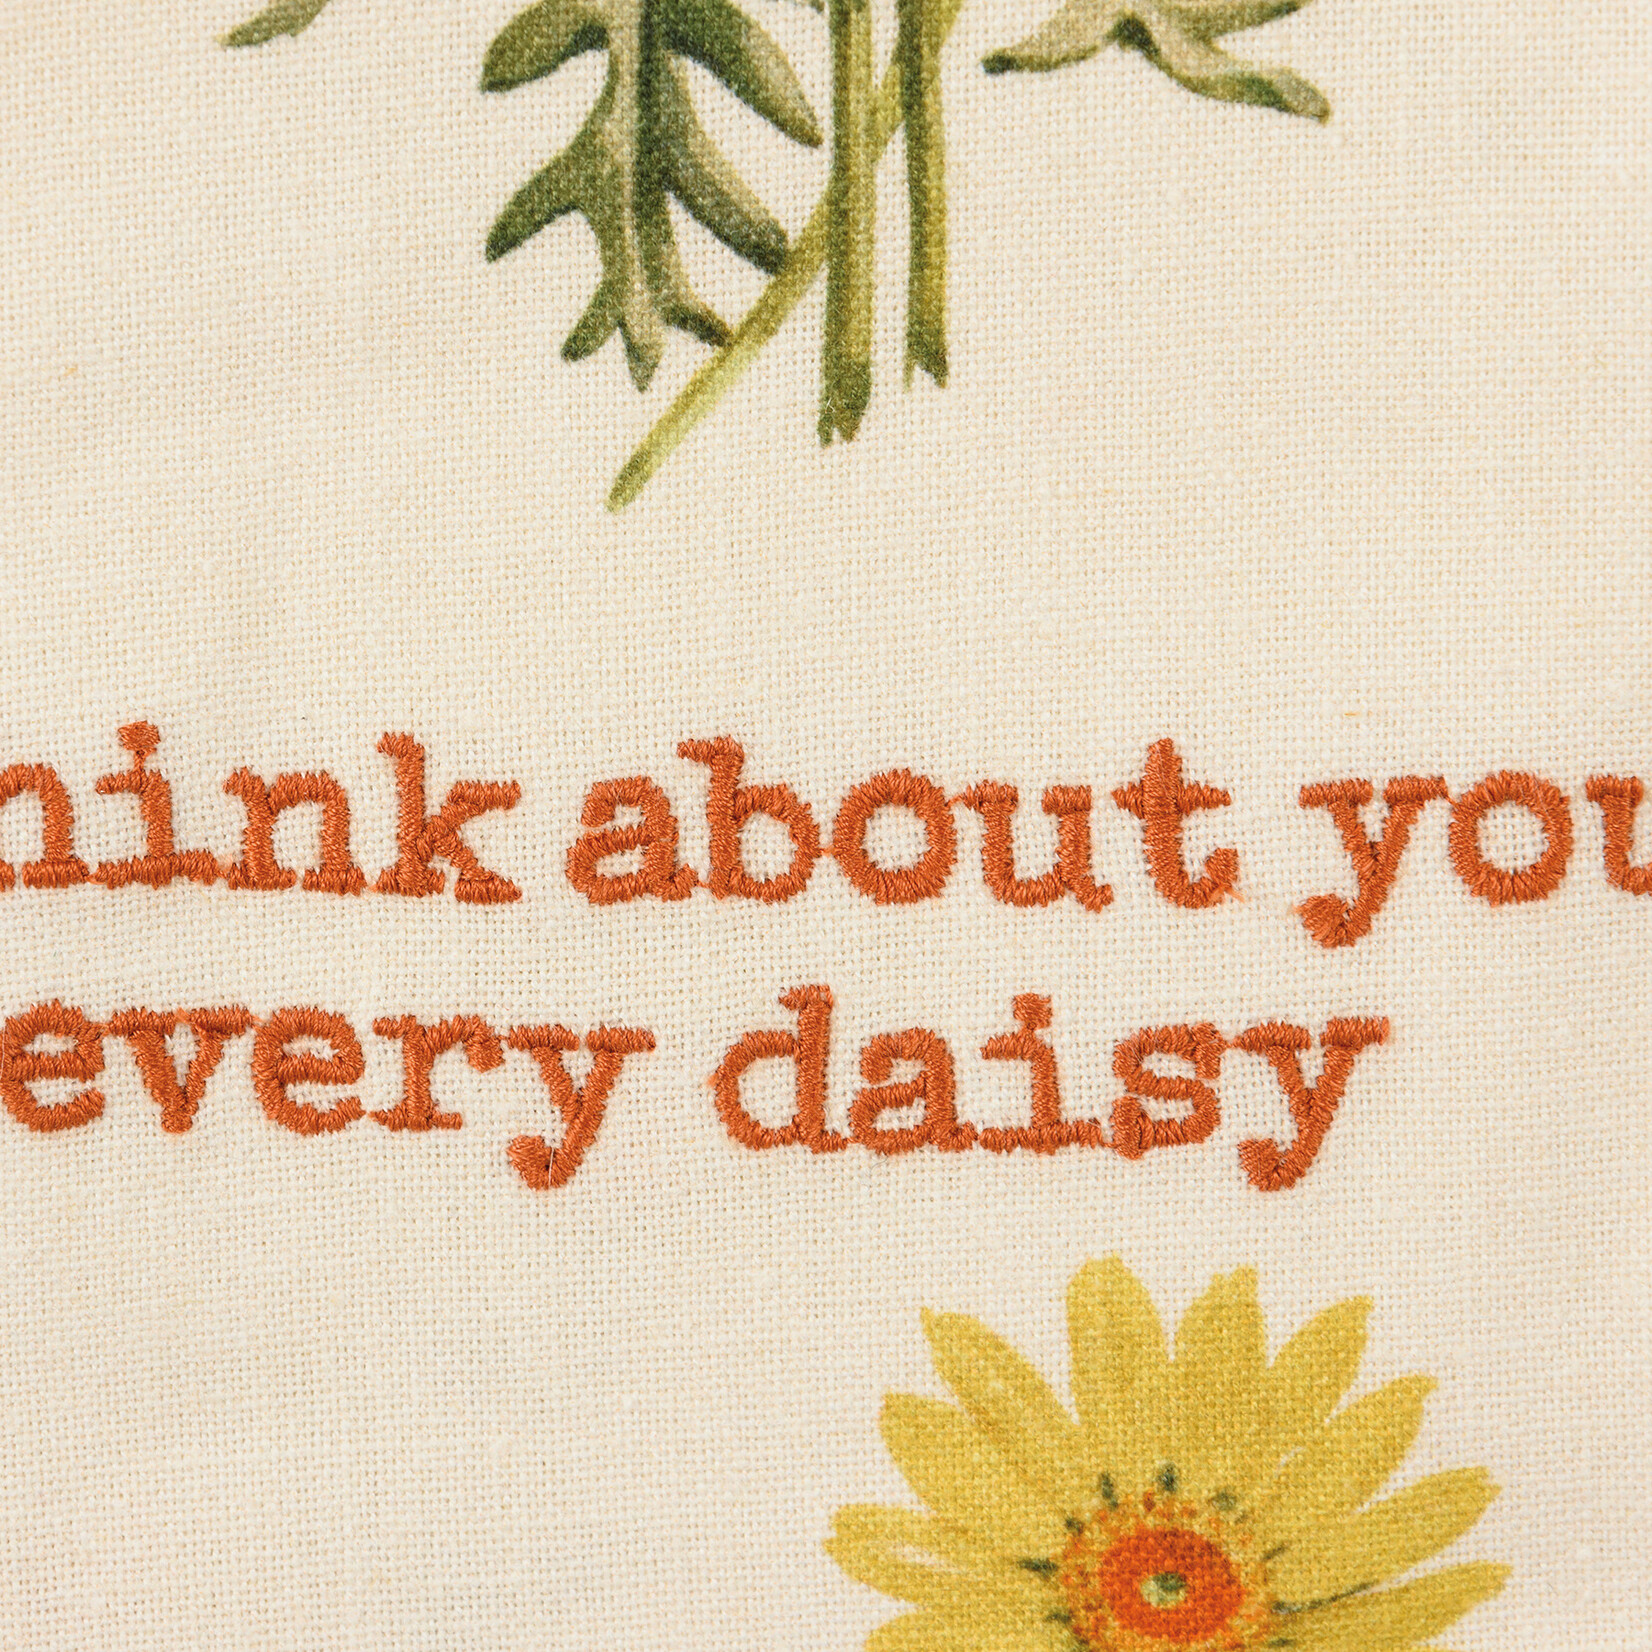 Primitives by Kathy Primitives by Kathy Every Daisy Kitchen Towel